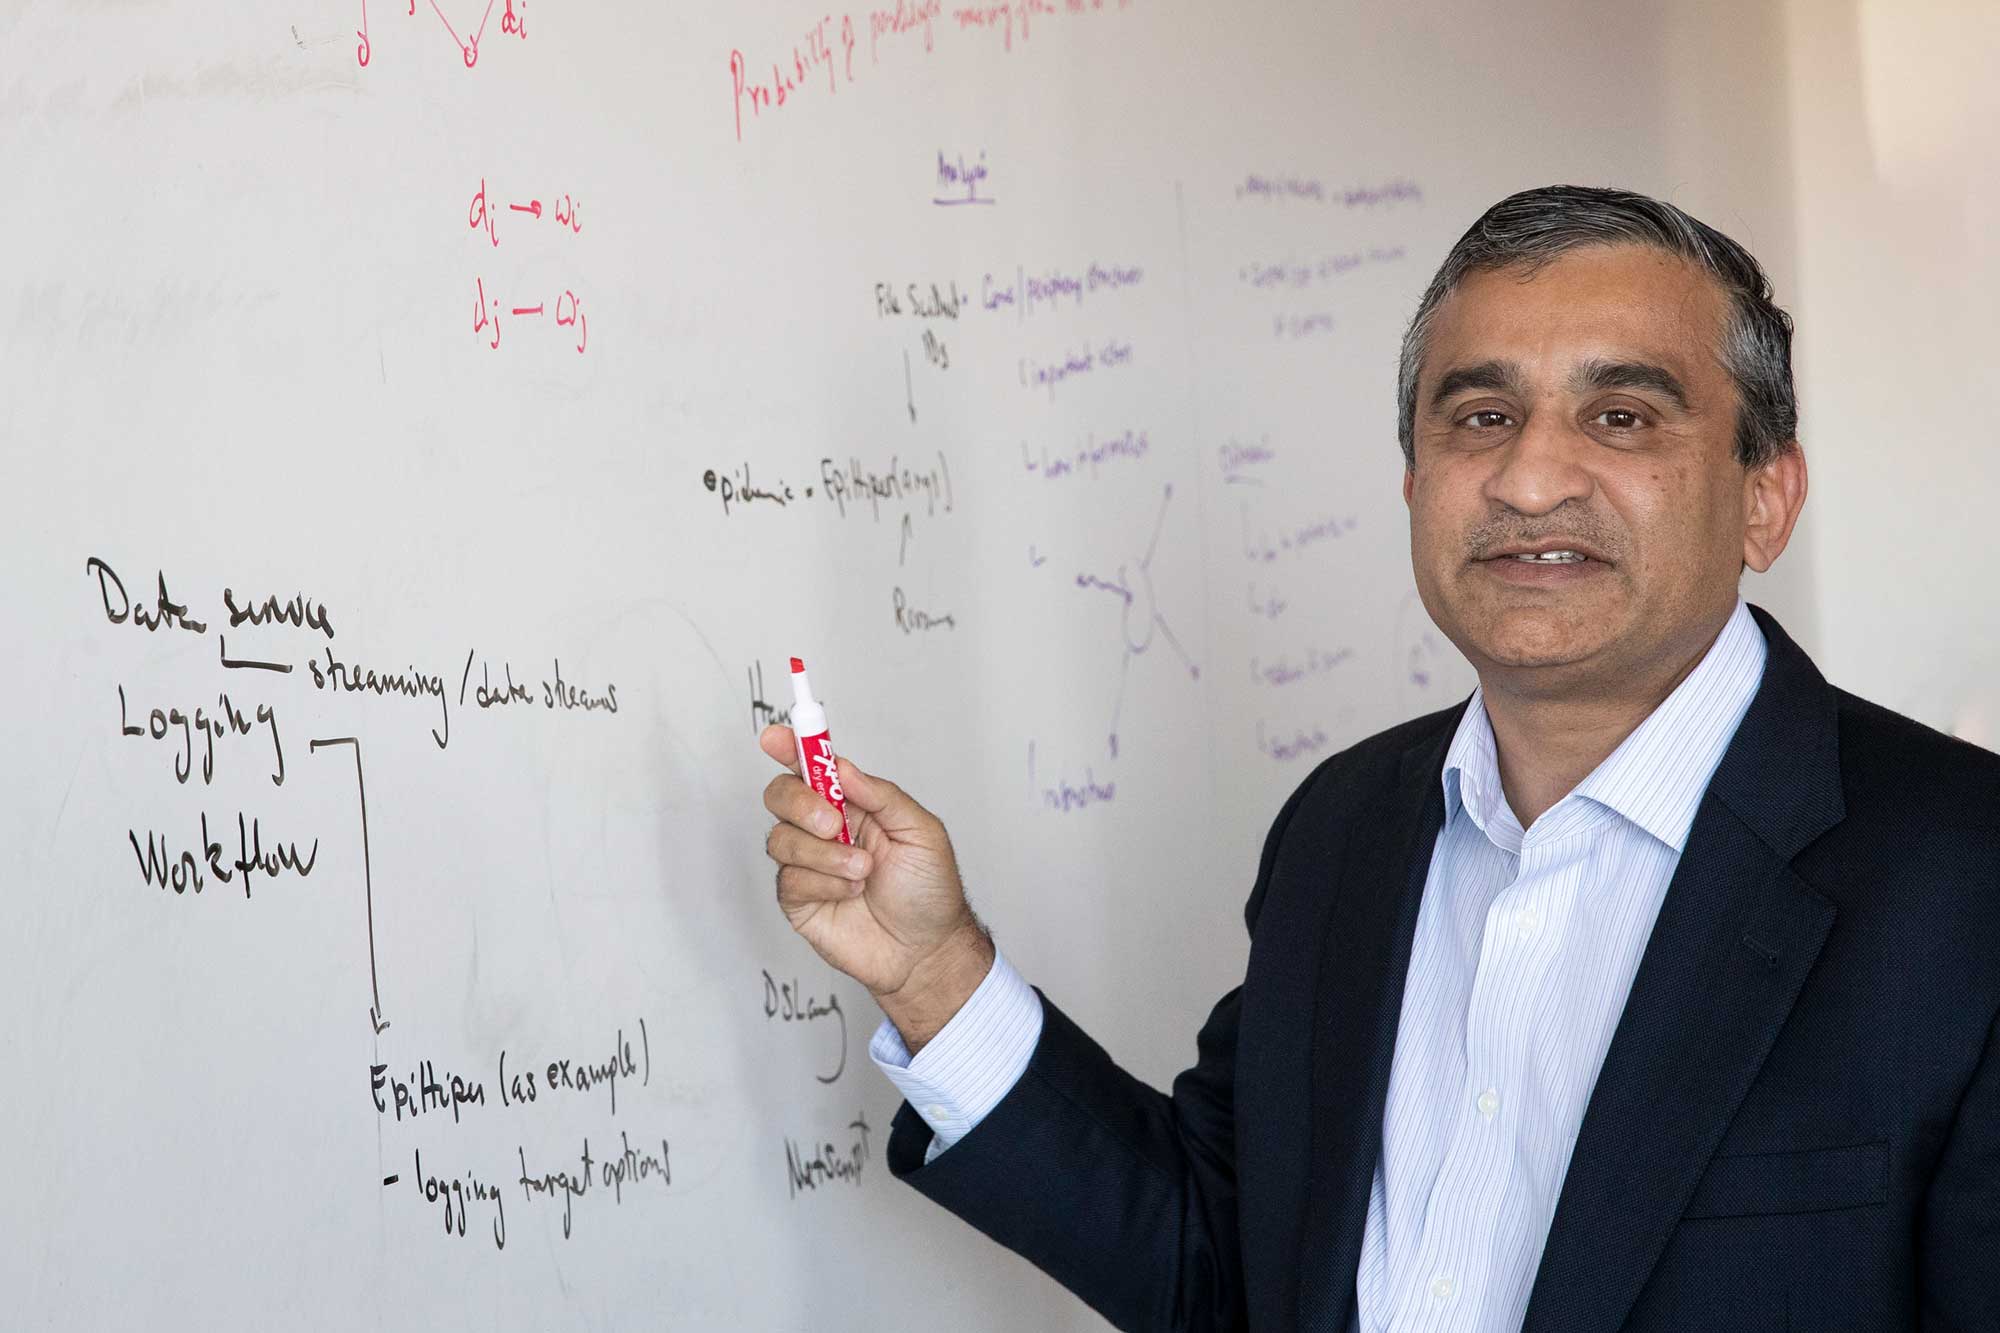 Madhav Marathe faces the camera while holding a dry erase marker next to a white board with text on it